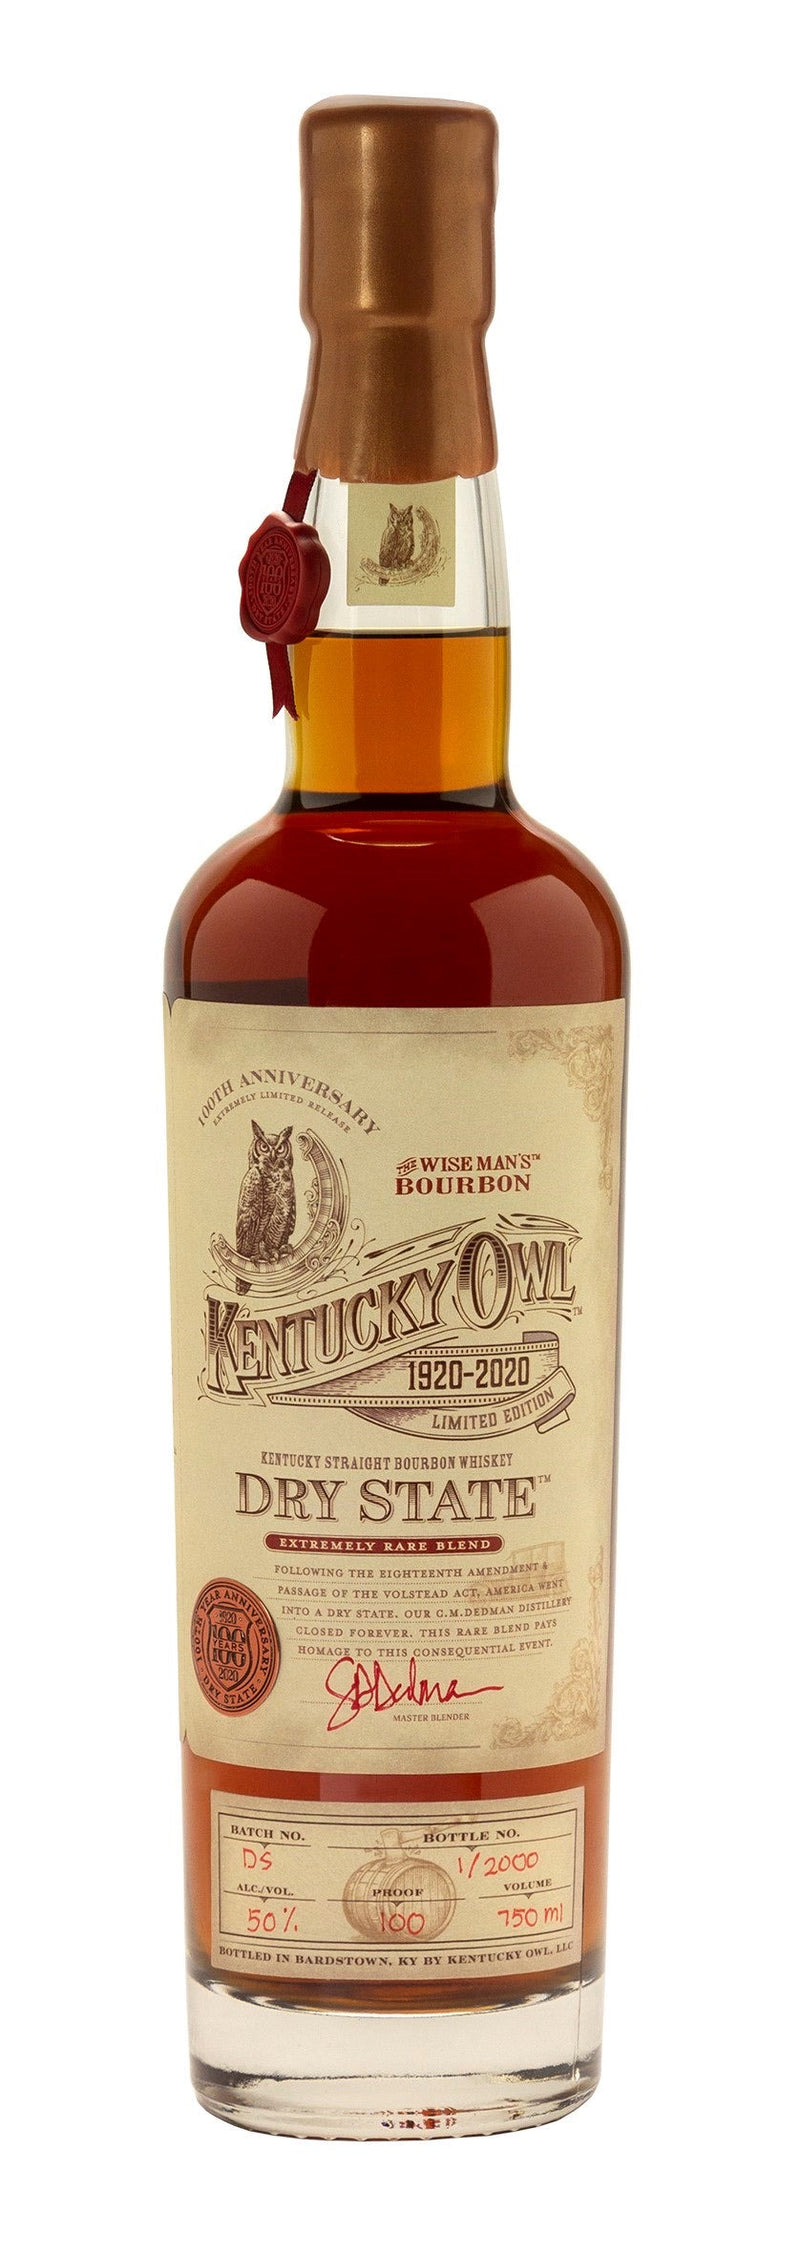 Kentucky Owl Dry State 100th Anniversary Release Bourbon Whiskey